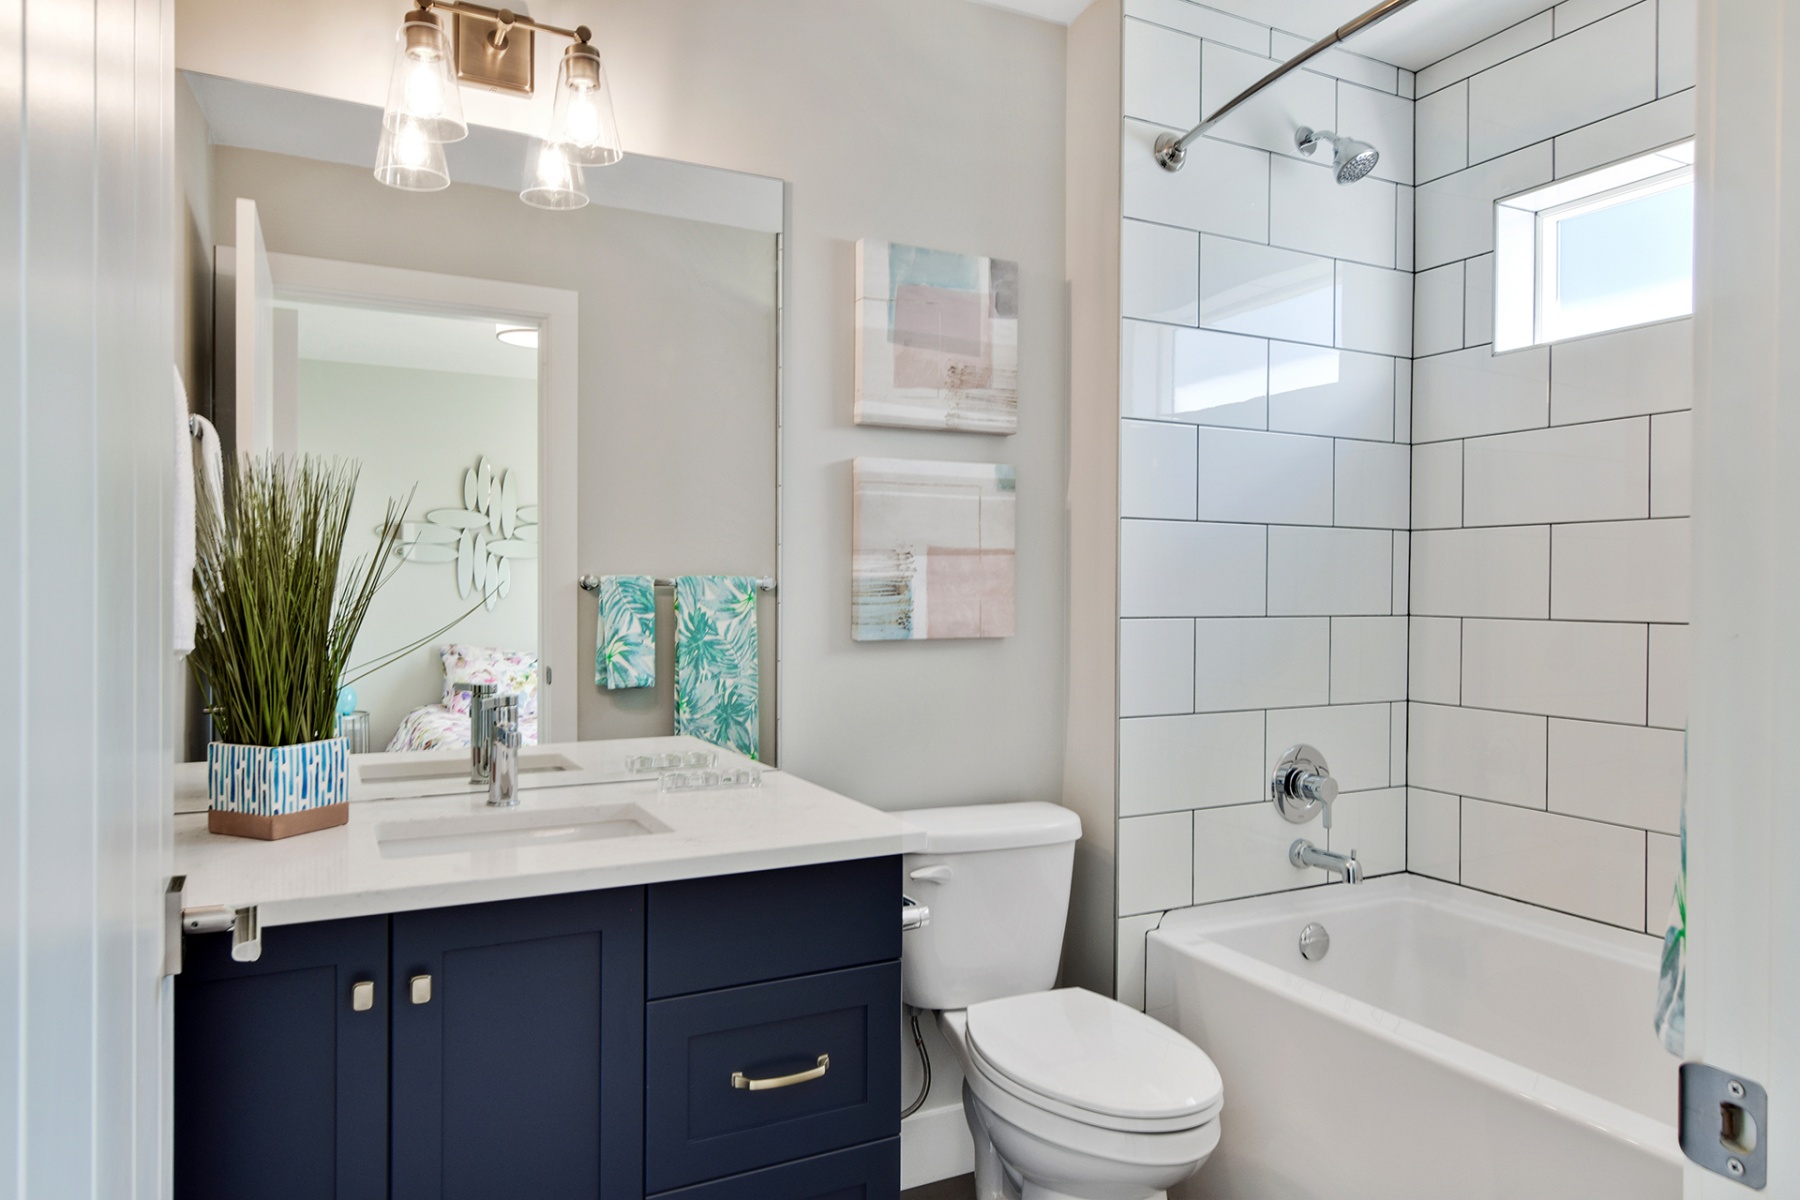 1_harmony_homes_glenwood_infill_project_bath_room_gallery_image_15